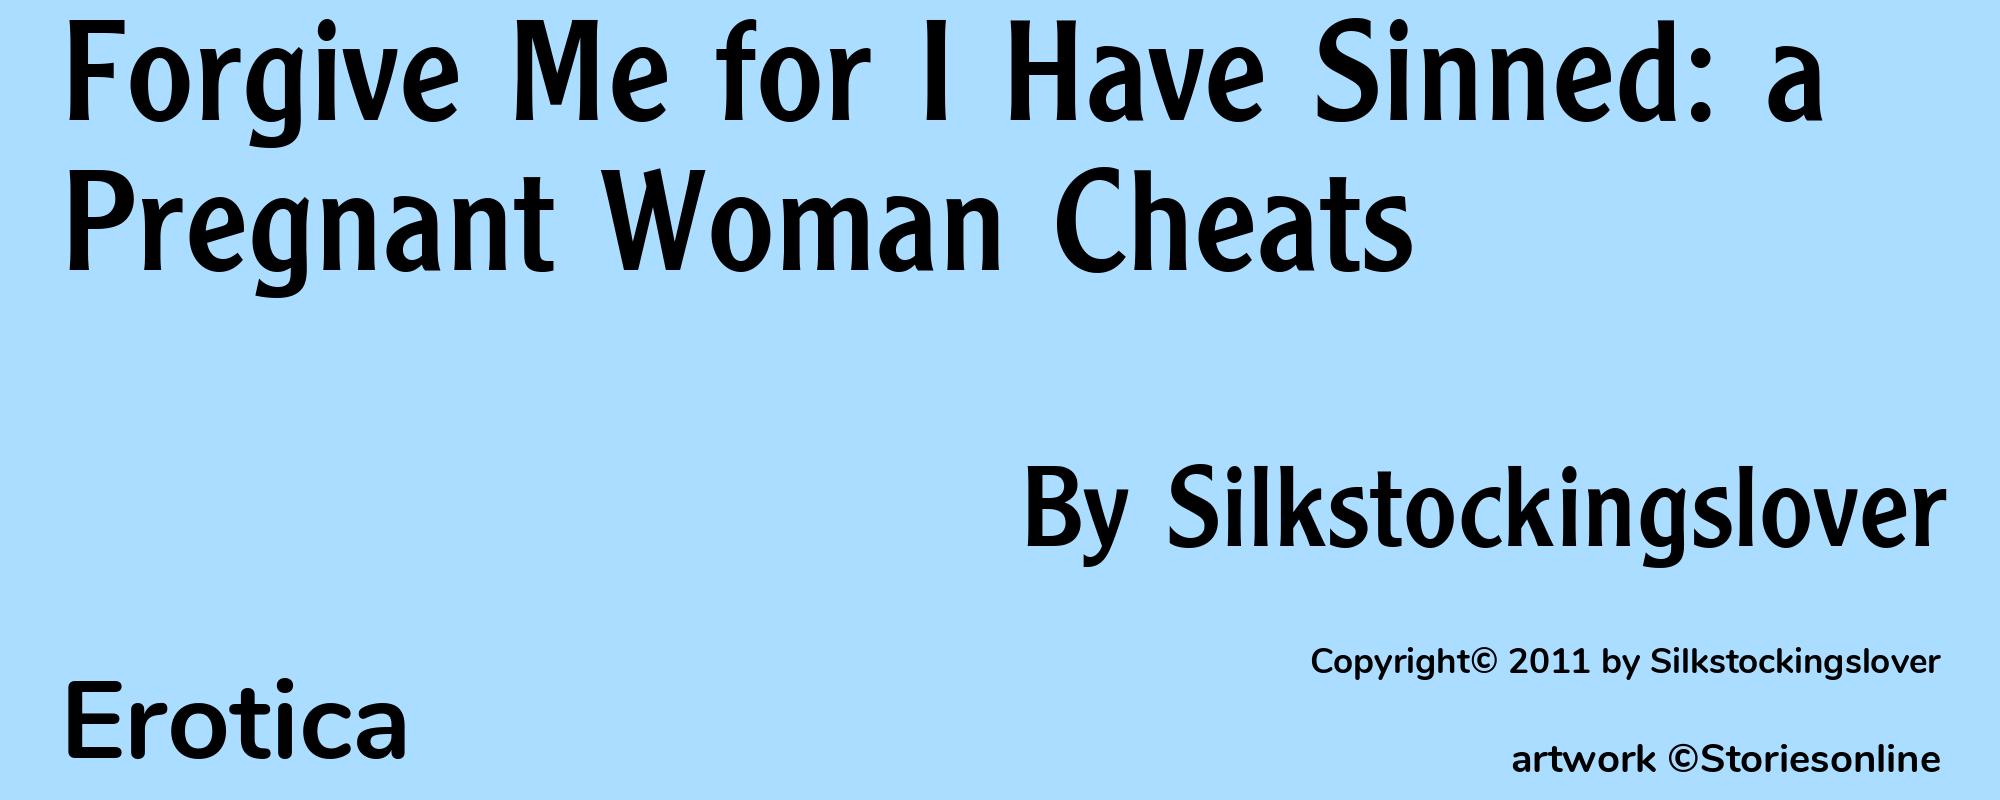 Forgive Me for I Have Sinned: a Pregnant Woman Cheats - Cover